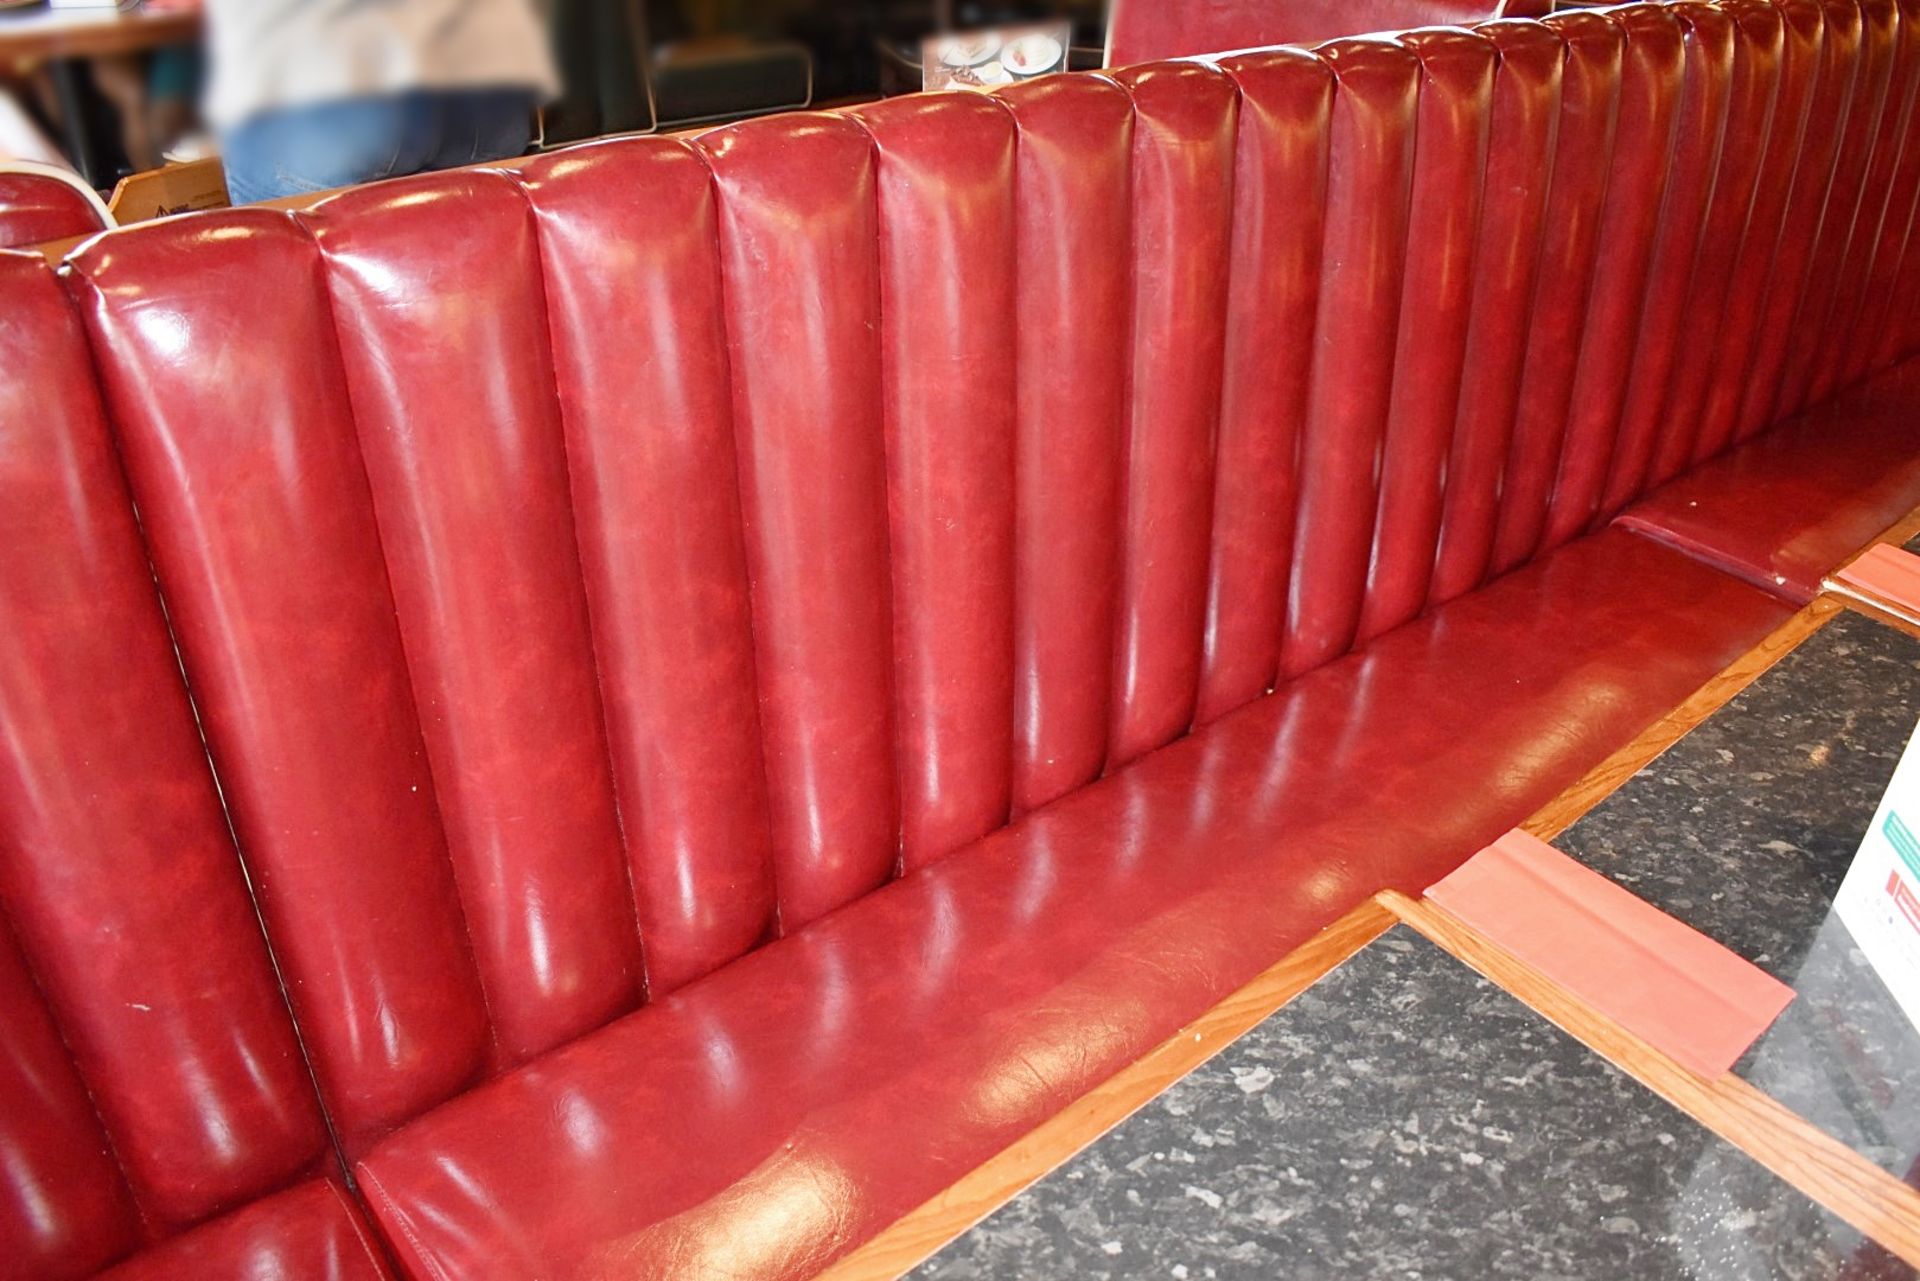 1 x Long Restaurant Seating Bench - Retro 1950s American Diner Design - Red Faux Leather